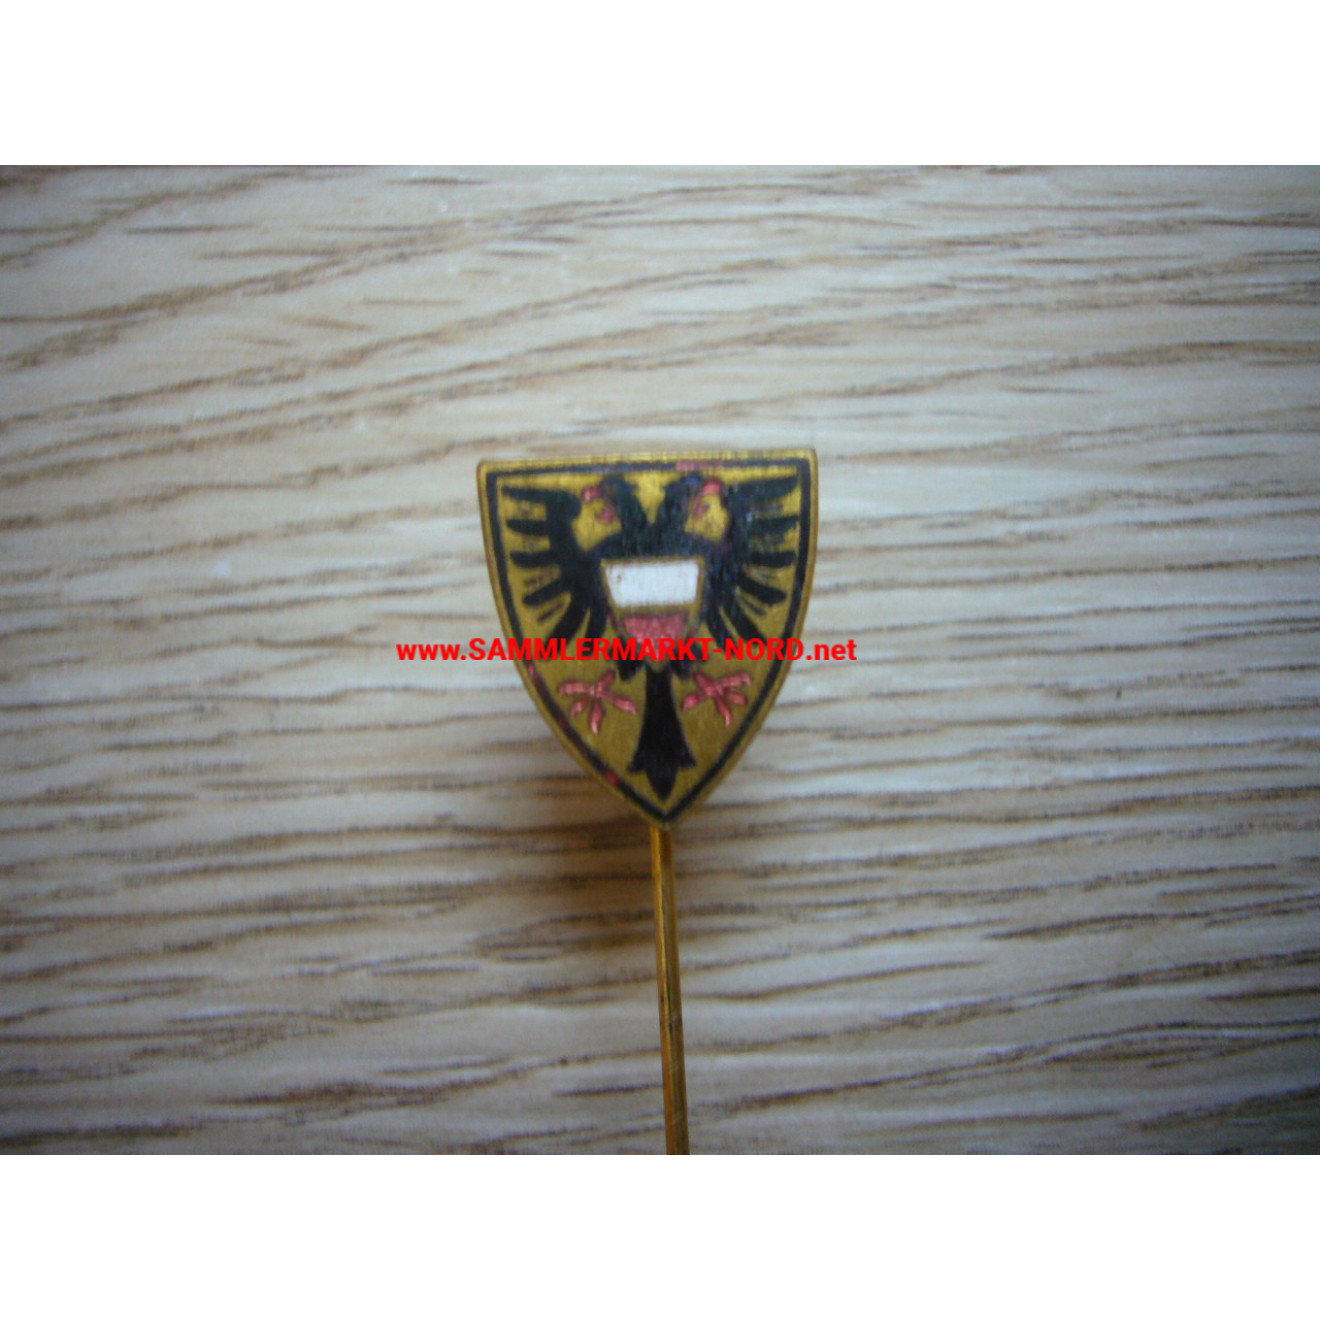 Hanseatic City of Lübeck - City coat of arms - Pin